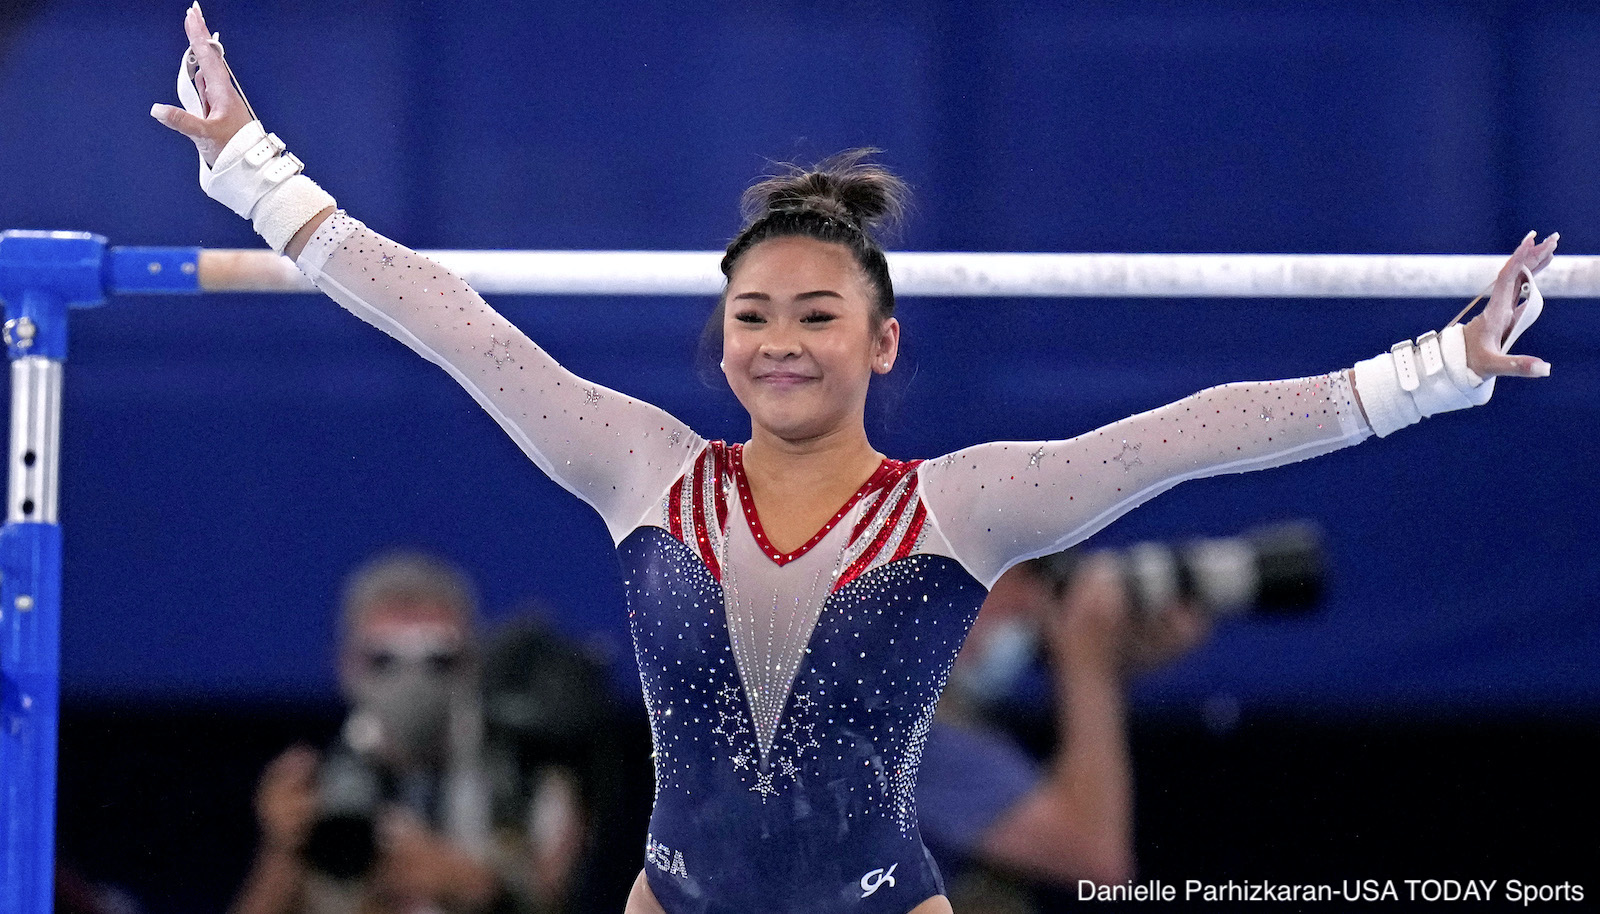 2 Minnesota gymnasts win team silver medals at Tokyo Olympics